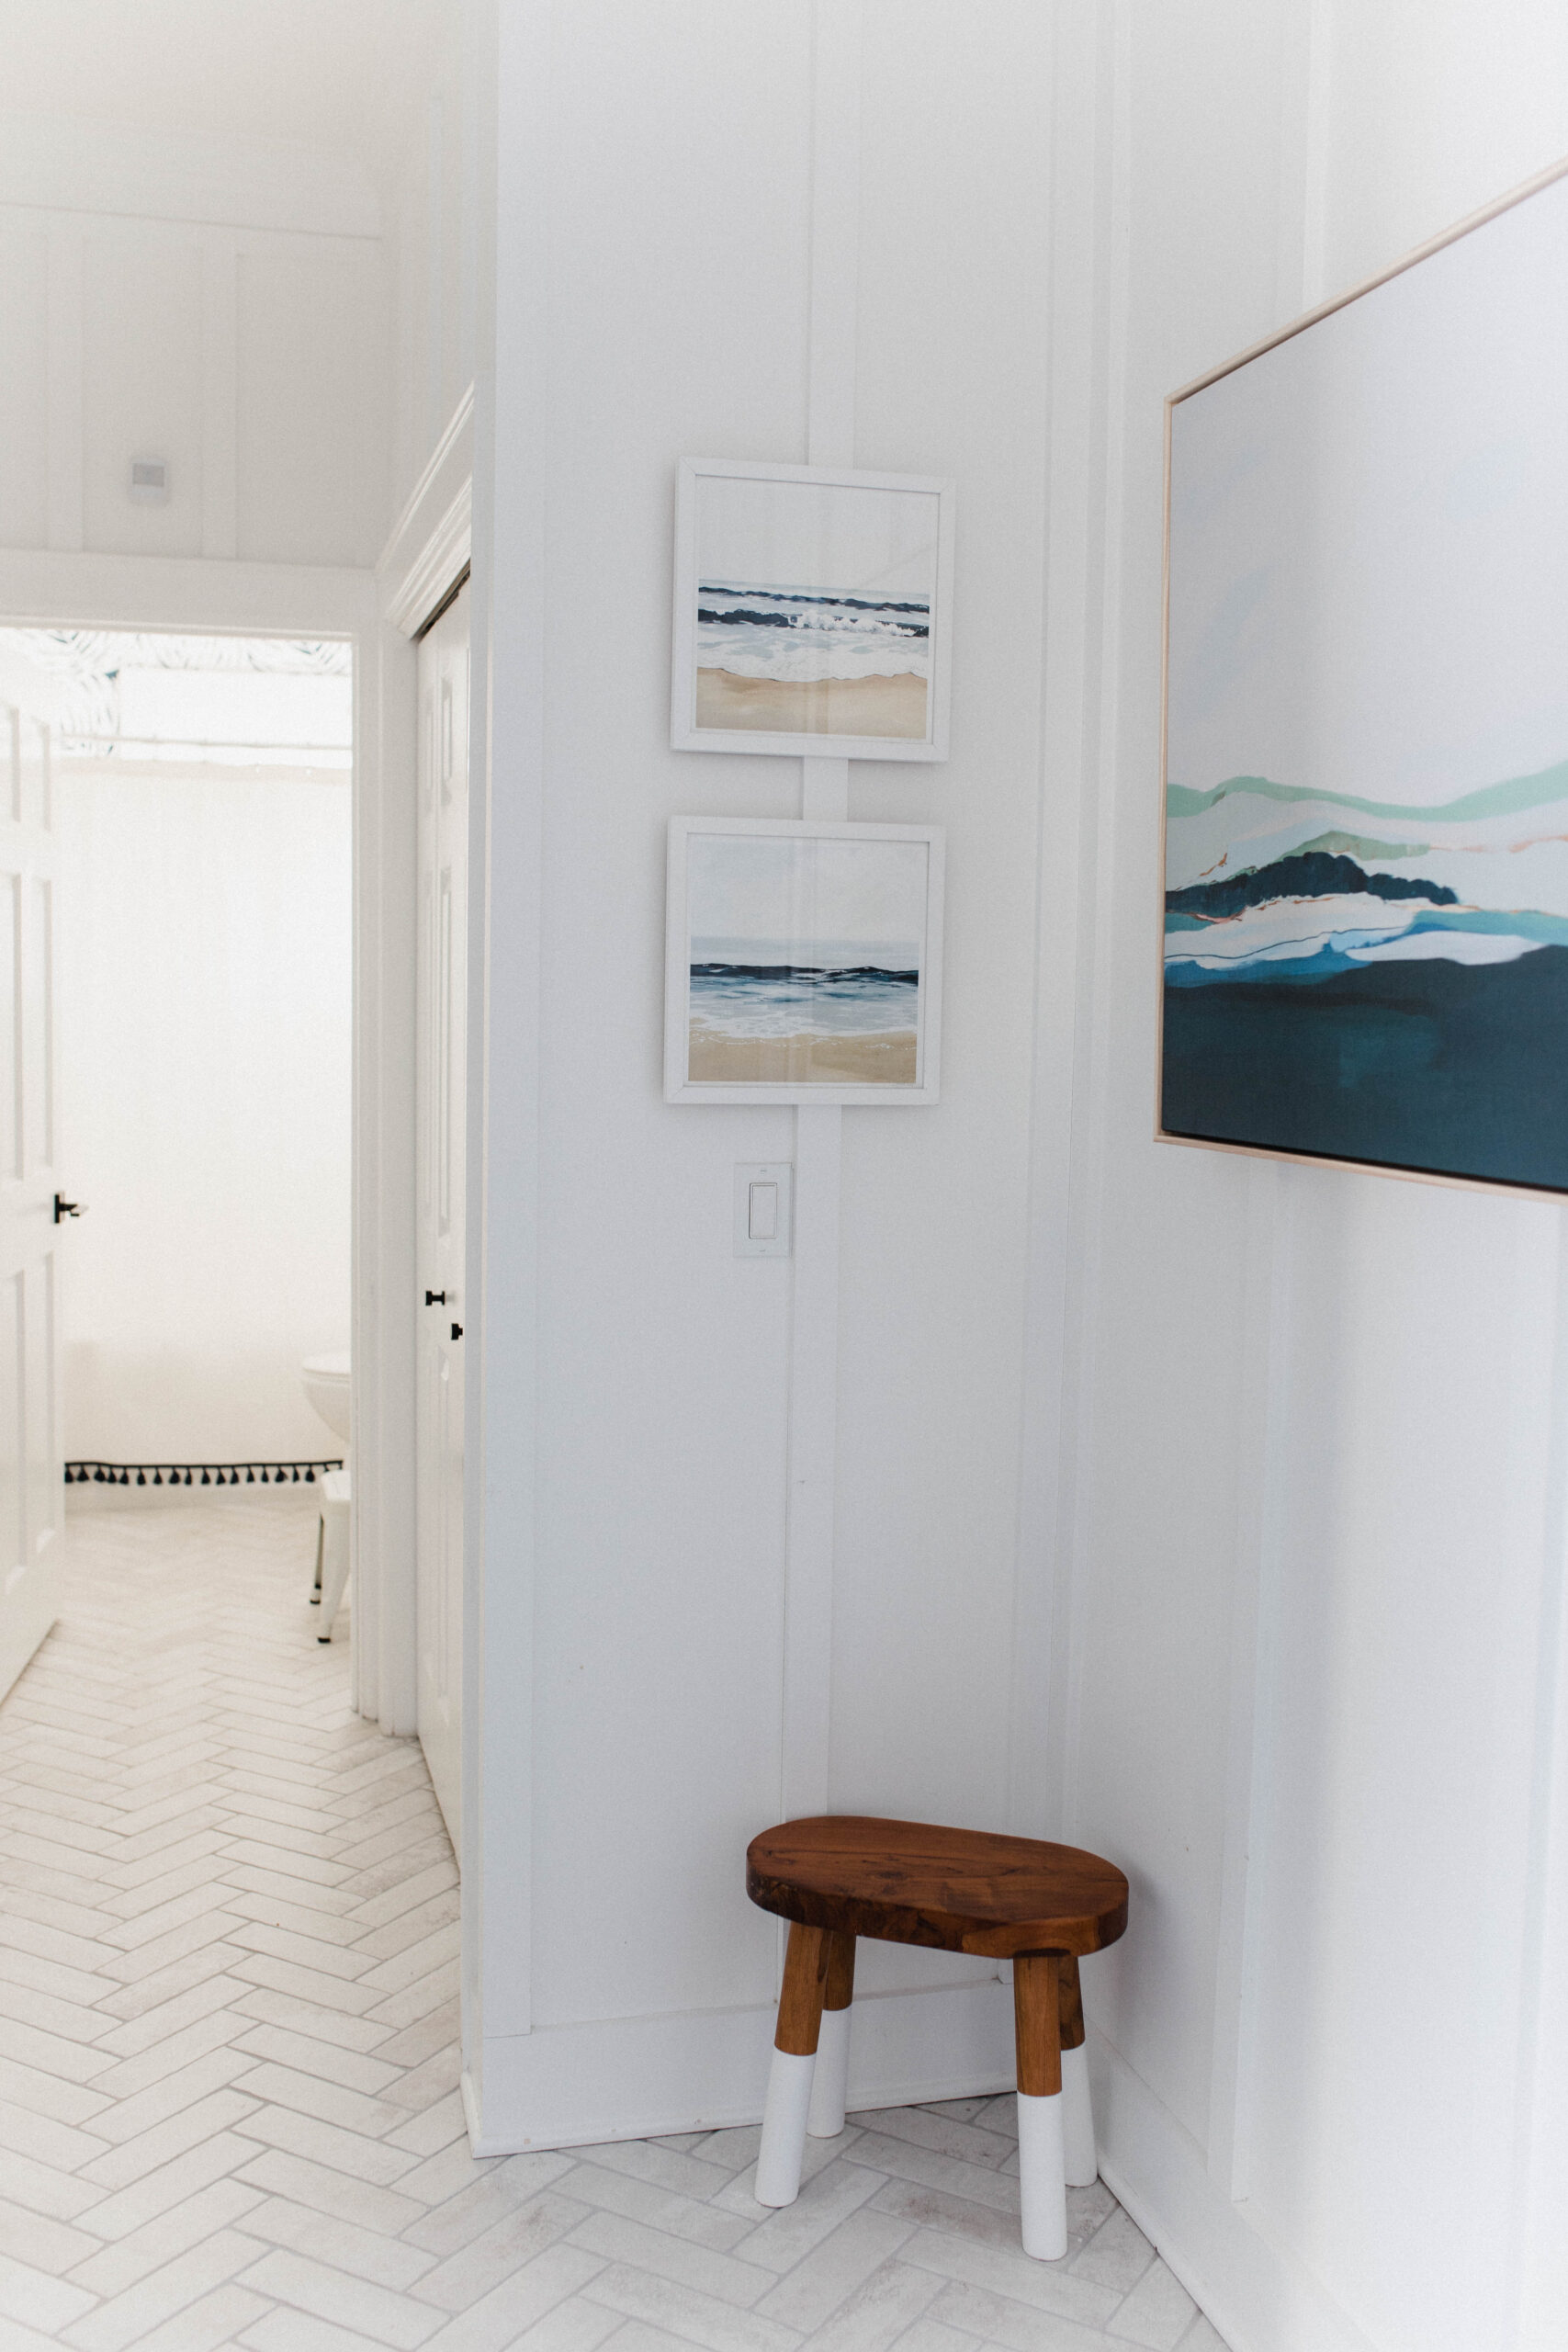 Connecticut life and style blogger Lauren McBride shares her modern coastal mudroom and bathroom makeover including sources.